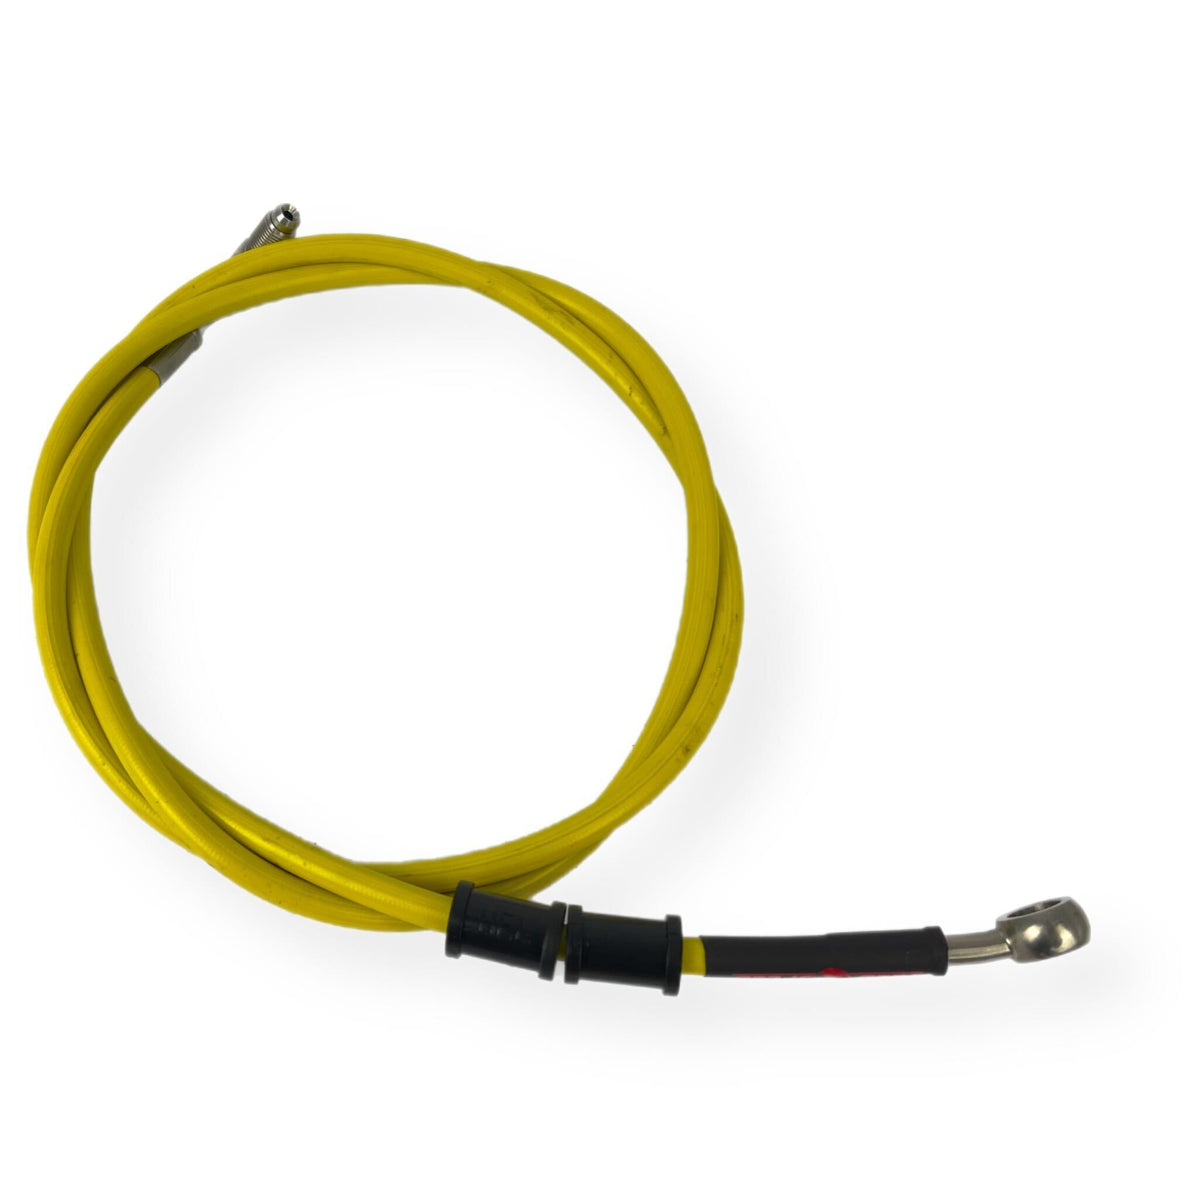 Vespa PX Disc LML HEL Stainless Hydraulic Front Brake Hose - Yellow